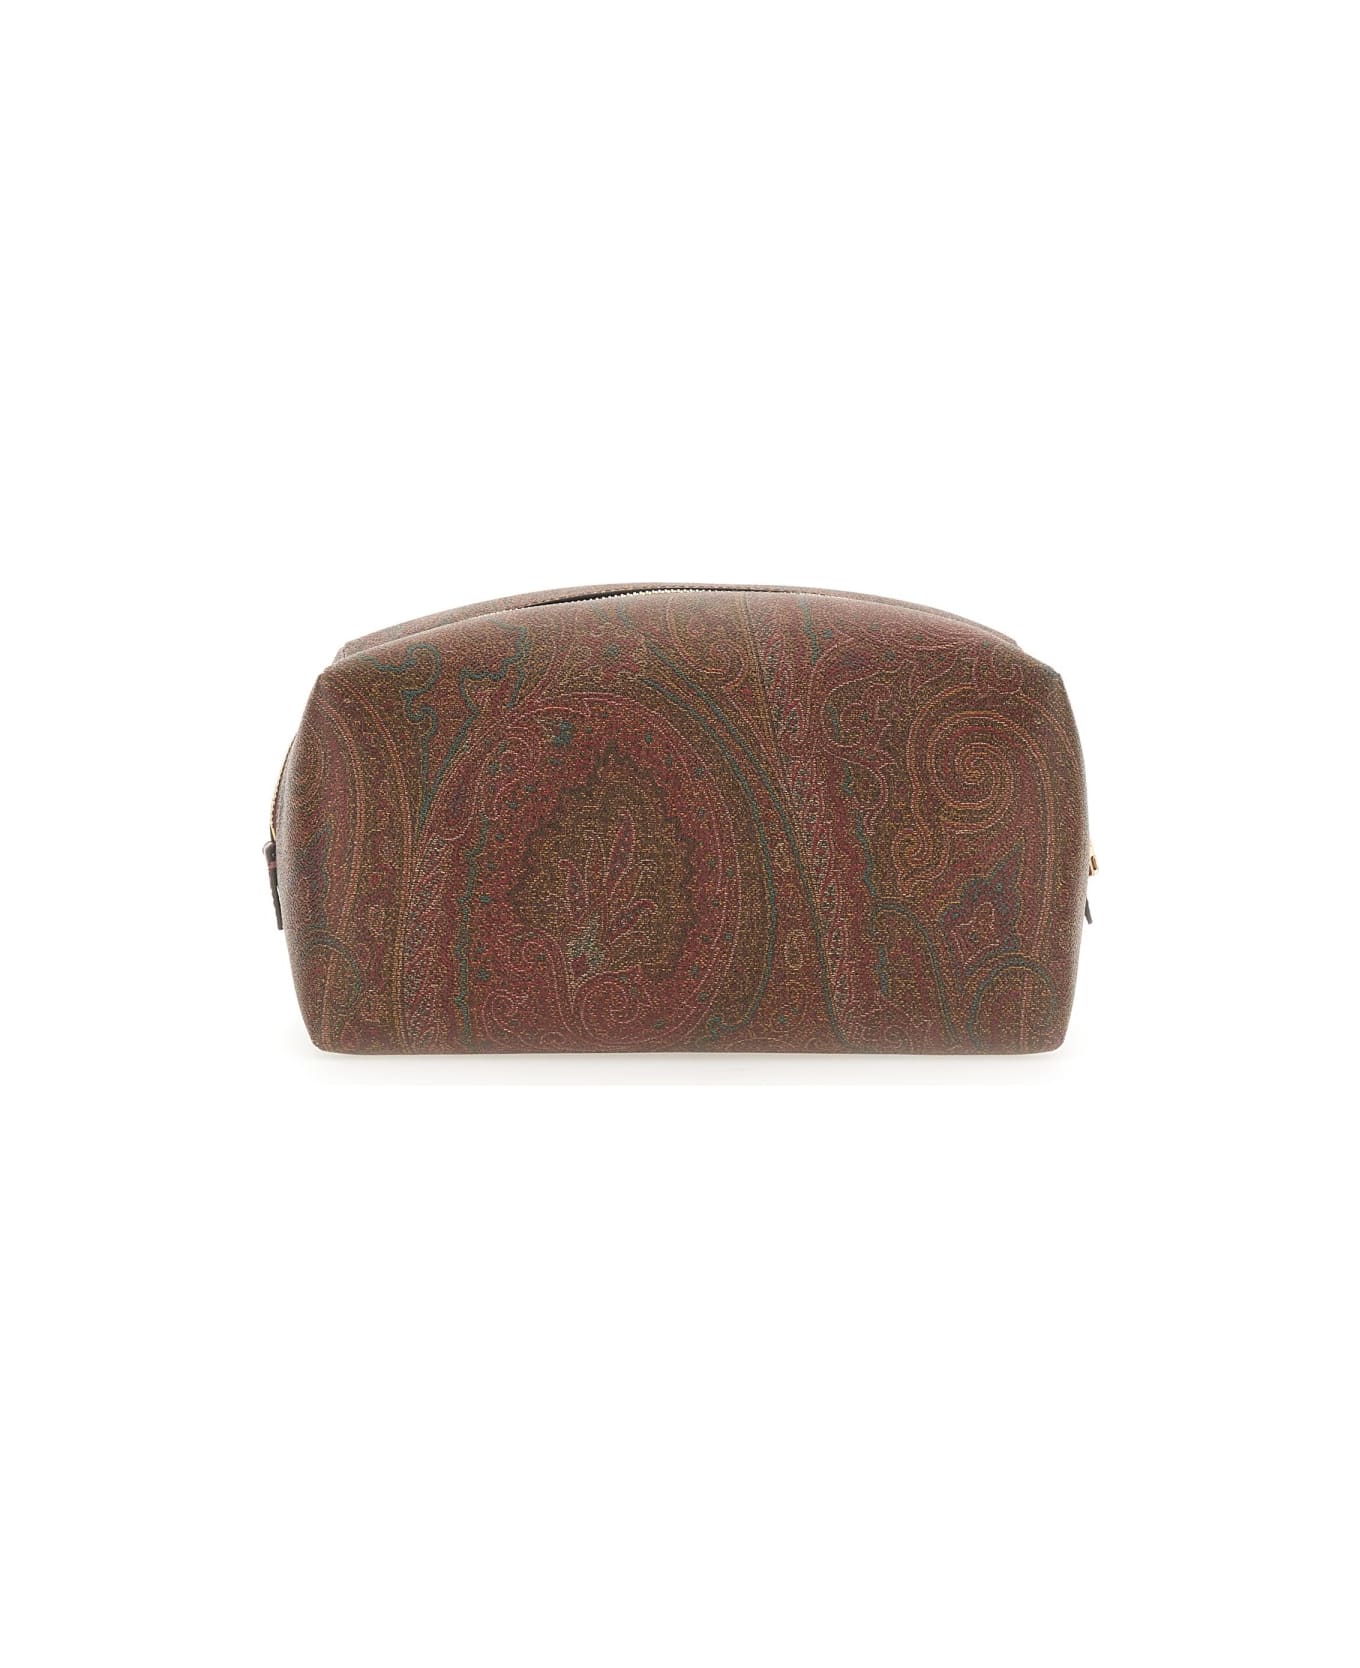 Etro Paisley Print Beauty Case - RED